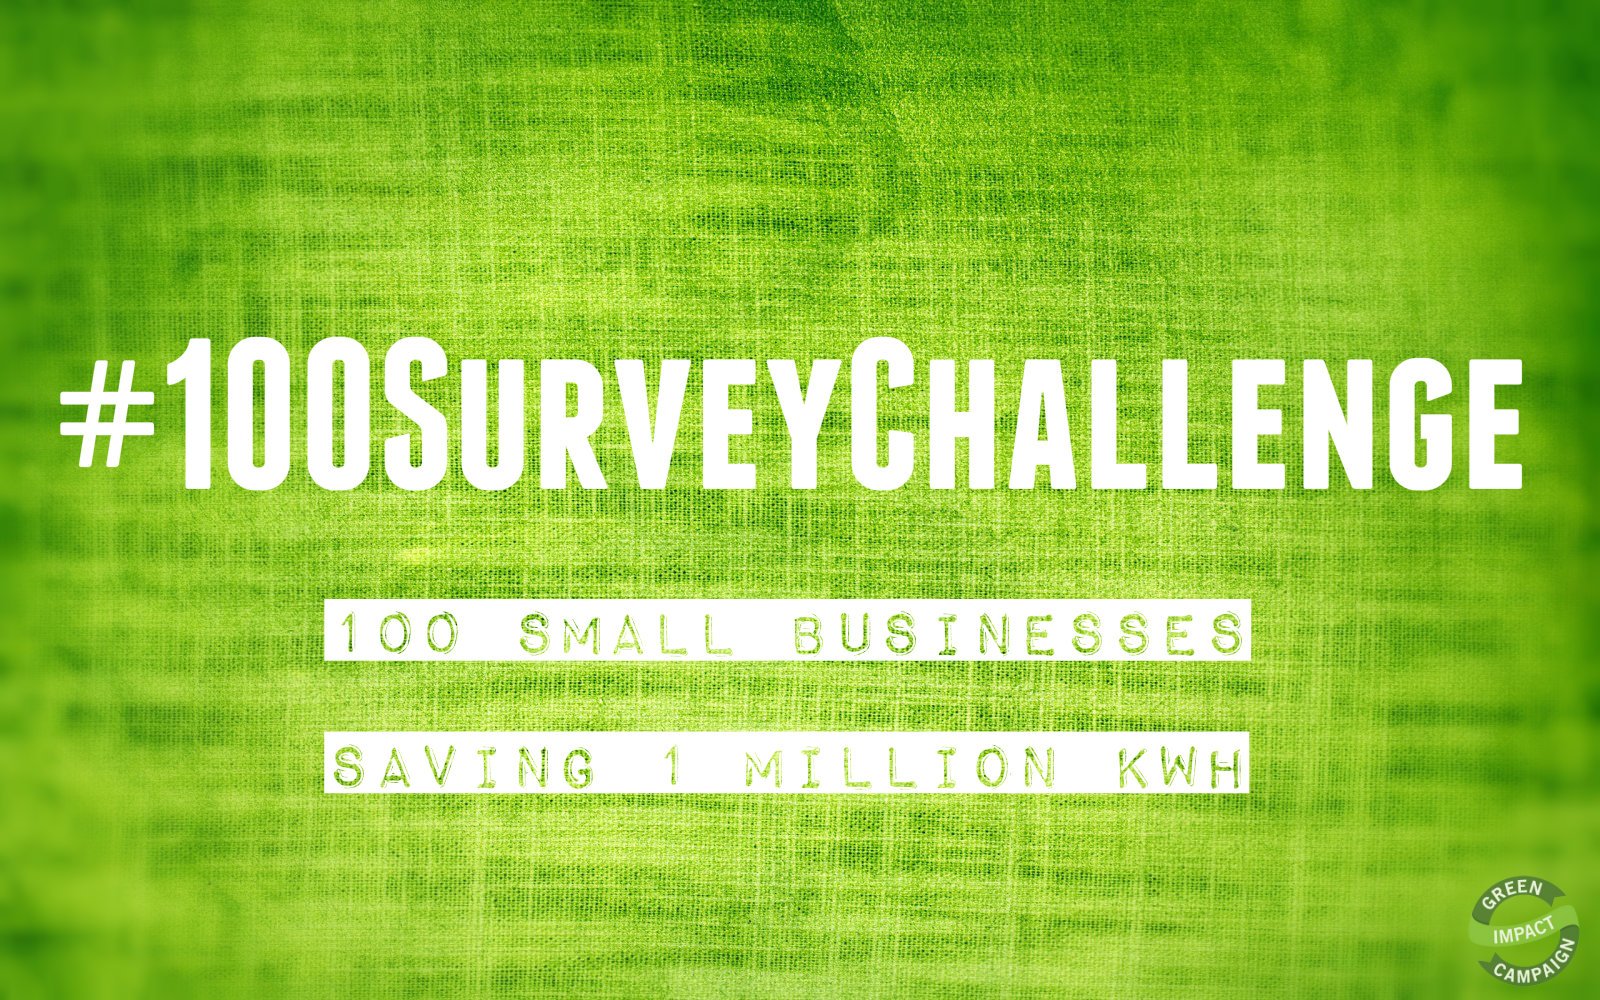 Introducing the #100SurveyChallenge